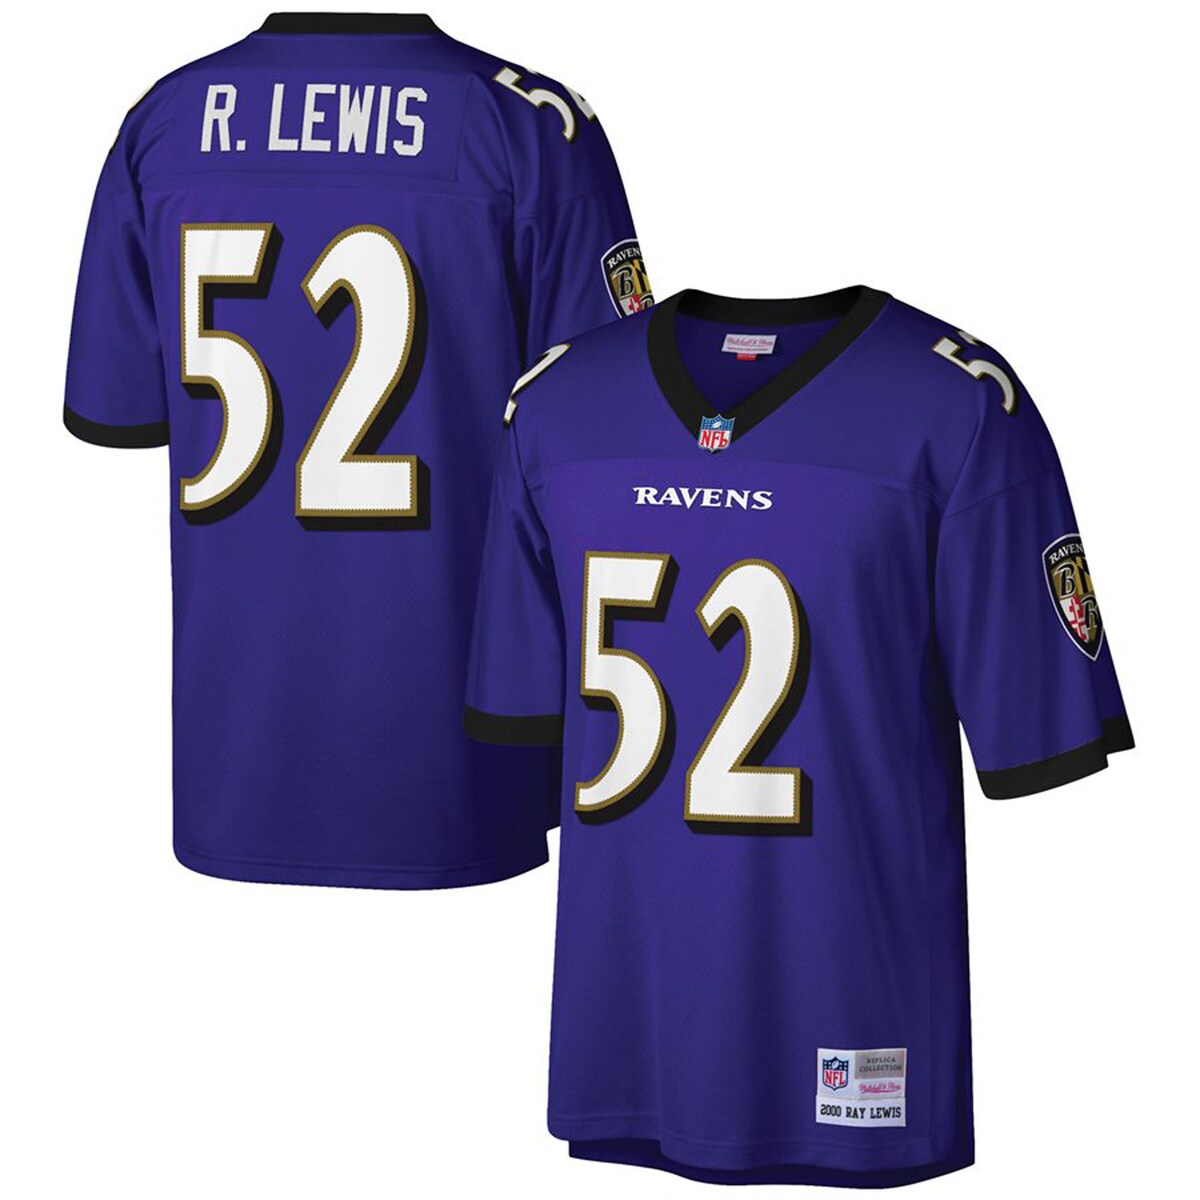 Wear your enthusiasm for the Baltimore Ravens proudly when you get this Ray Lewis 2000 Retired Player replica jersey from Mitchell & Ness.V-neckMaterial: 100% PolyesterShort sleeveTackle twill appliqueMachine wash, tumble dry lowJersey Color Style: RetiredOfficially licensedReplica JerseyDrop tail hem with side splitsBack neck tapingImportedHeat-sealed sleeves stripesFabric applique graphics and NFL shieldBrand: Mitchell & NessFront and back yoke seamsRib-knit collarWoven jock tag on bottom left hemMesh body